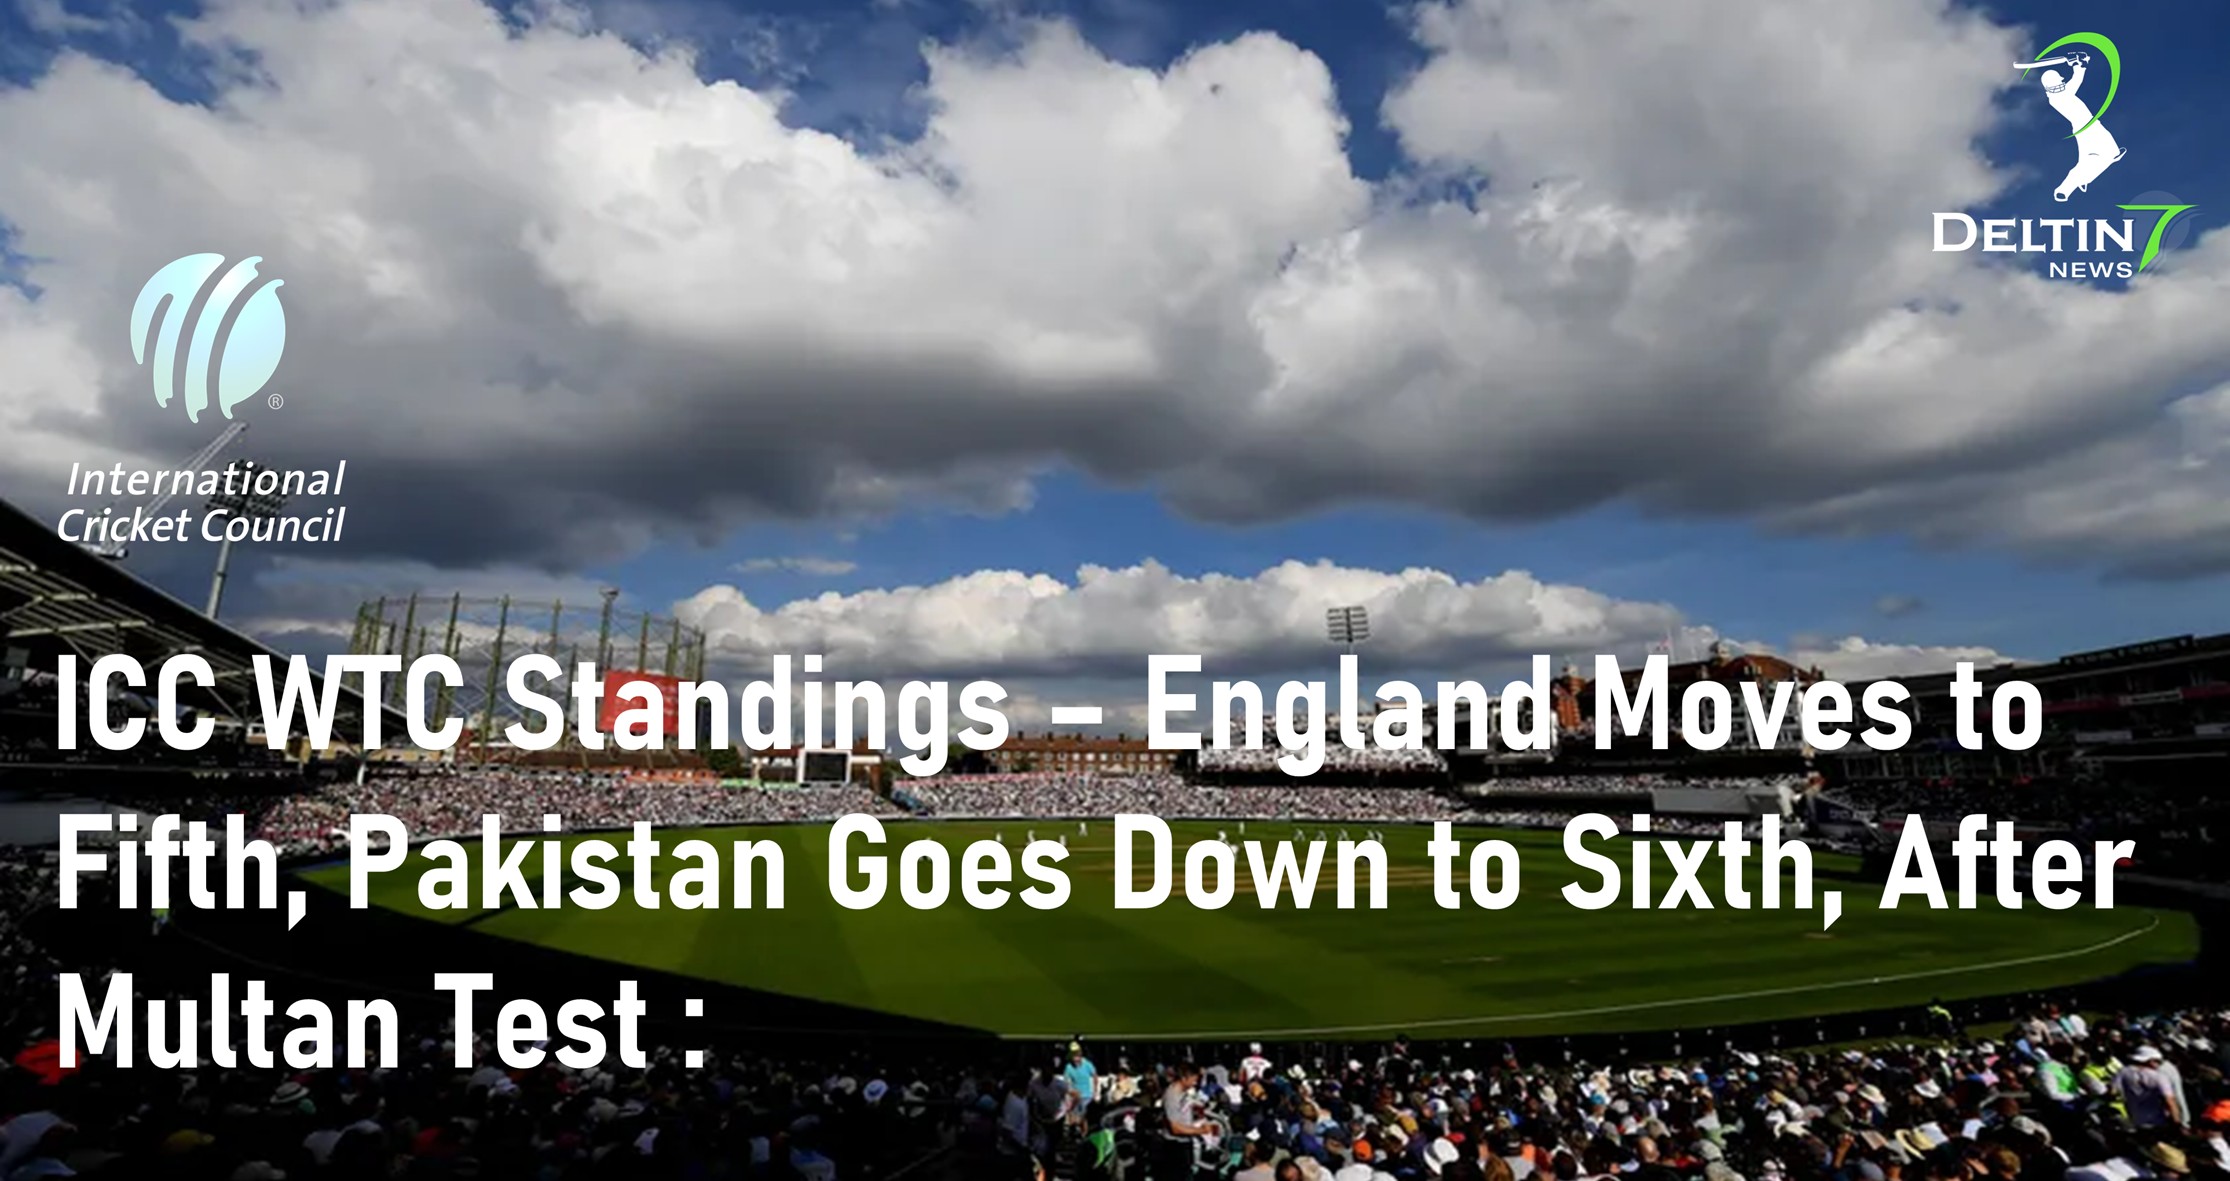 ICC WTC Standings – England Moves to Fifth, Pakistan Goes Down to Sixth, After Multan Test: